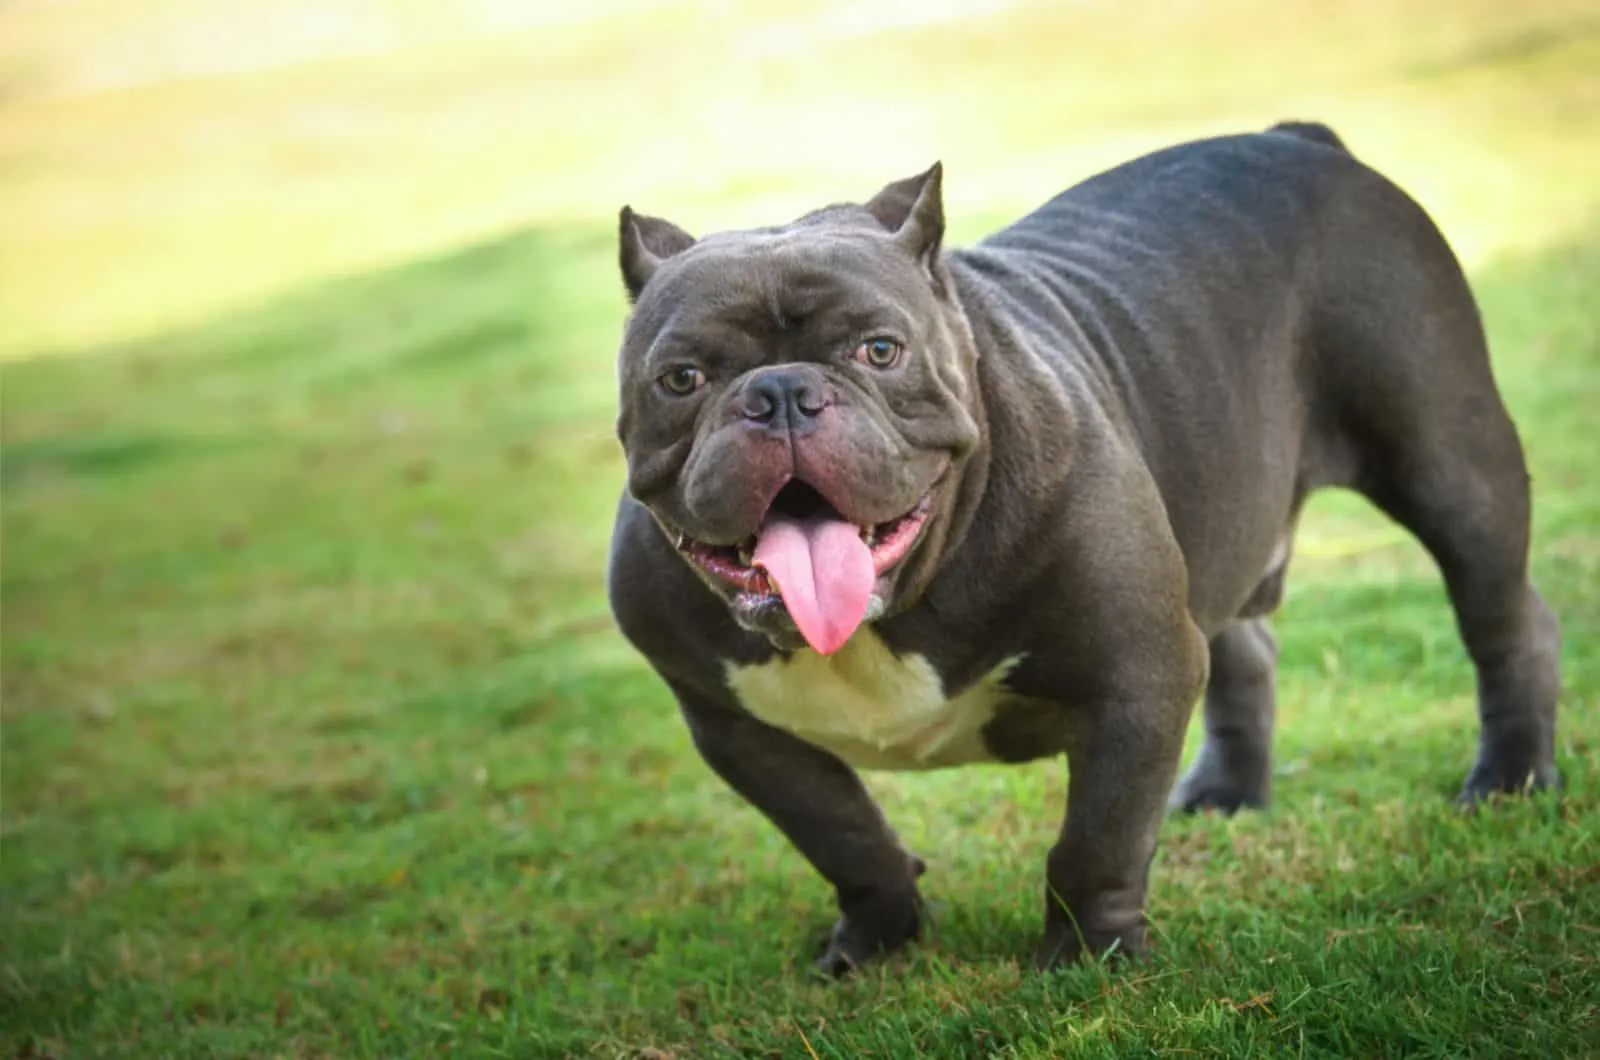 American bully dog species is standing at the lawn